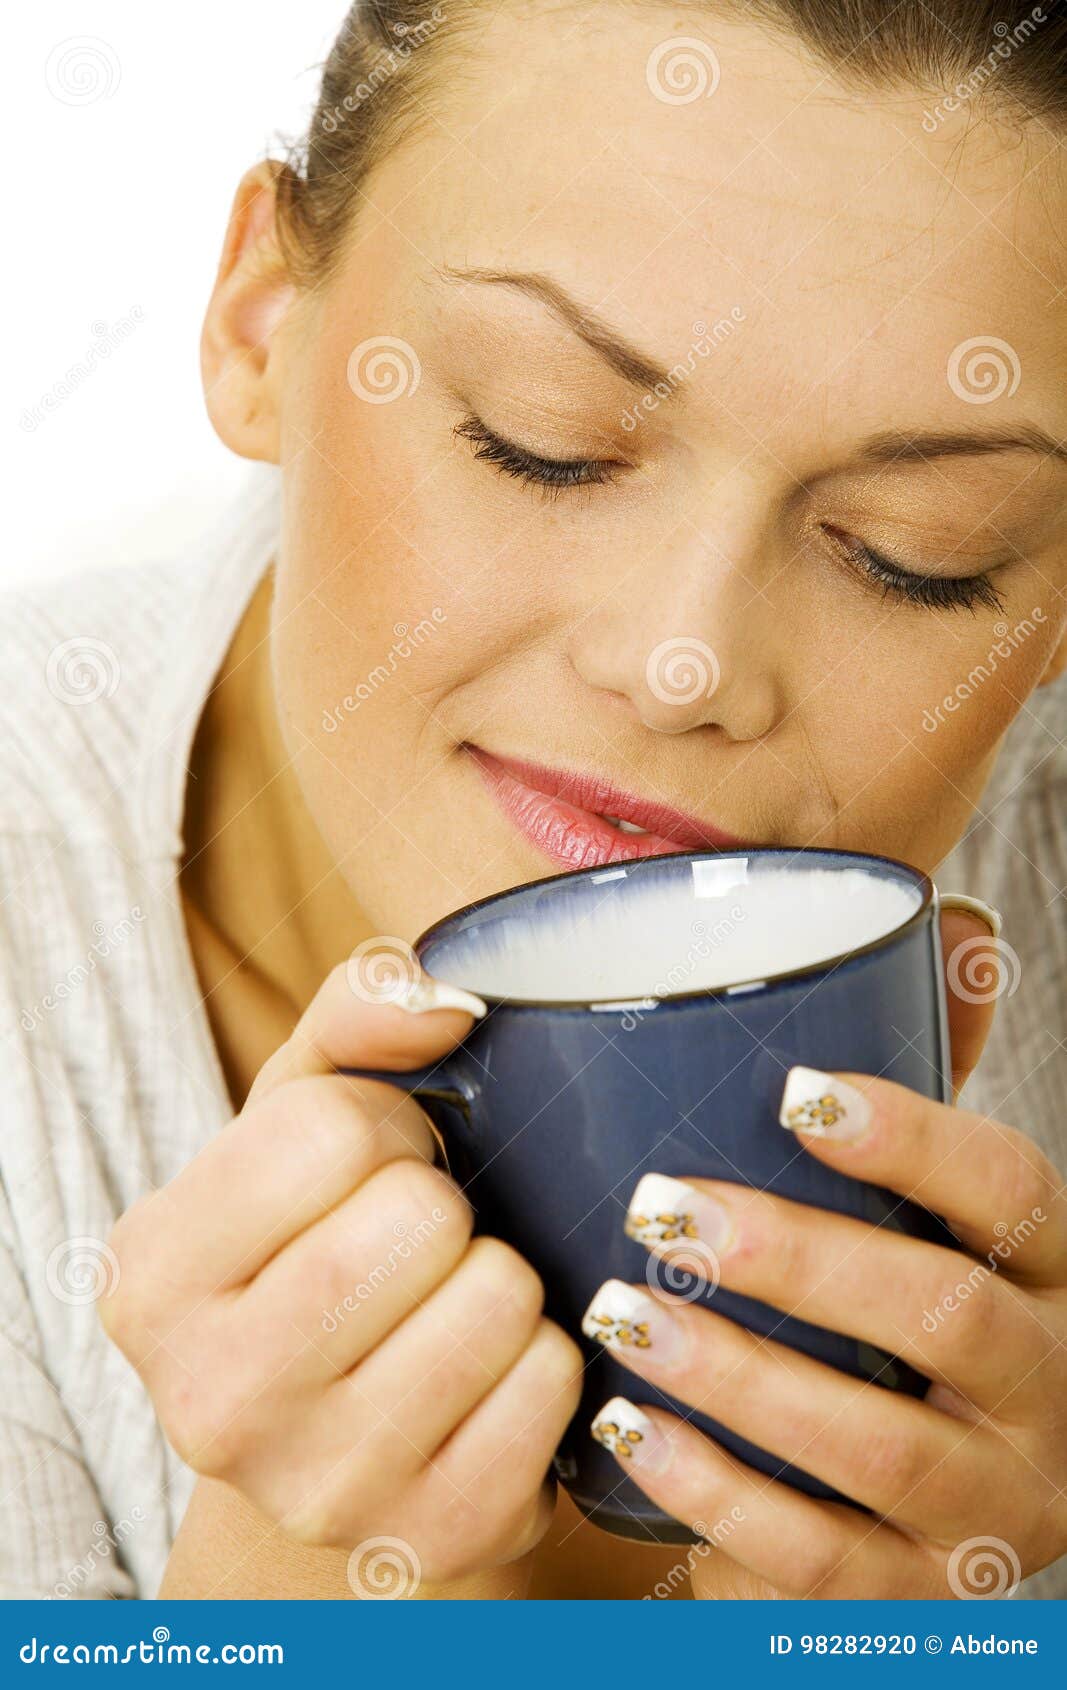 Happy Woman Thinking Holding a Cup of Tea Stock Photo - Image of beauty ...